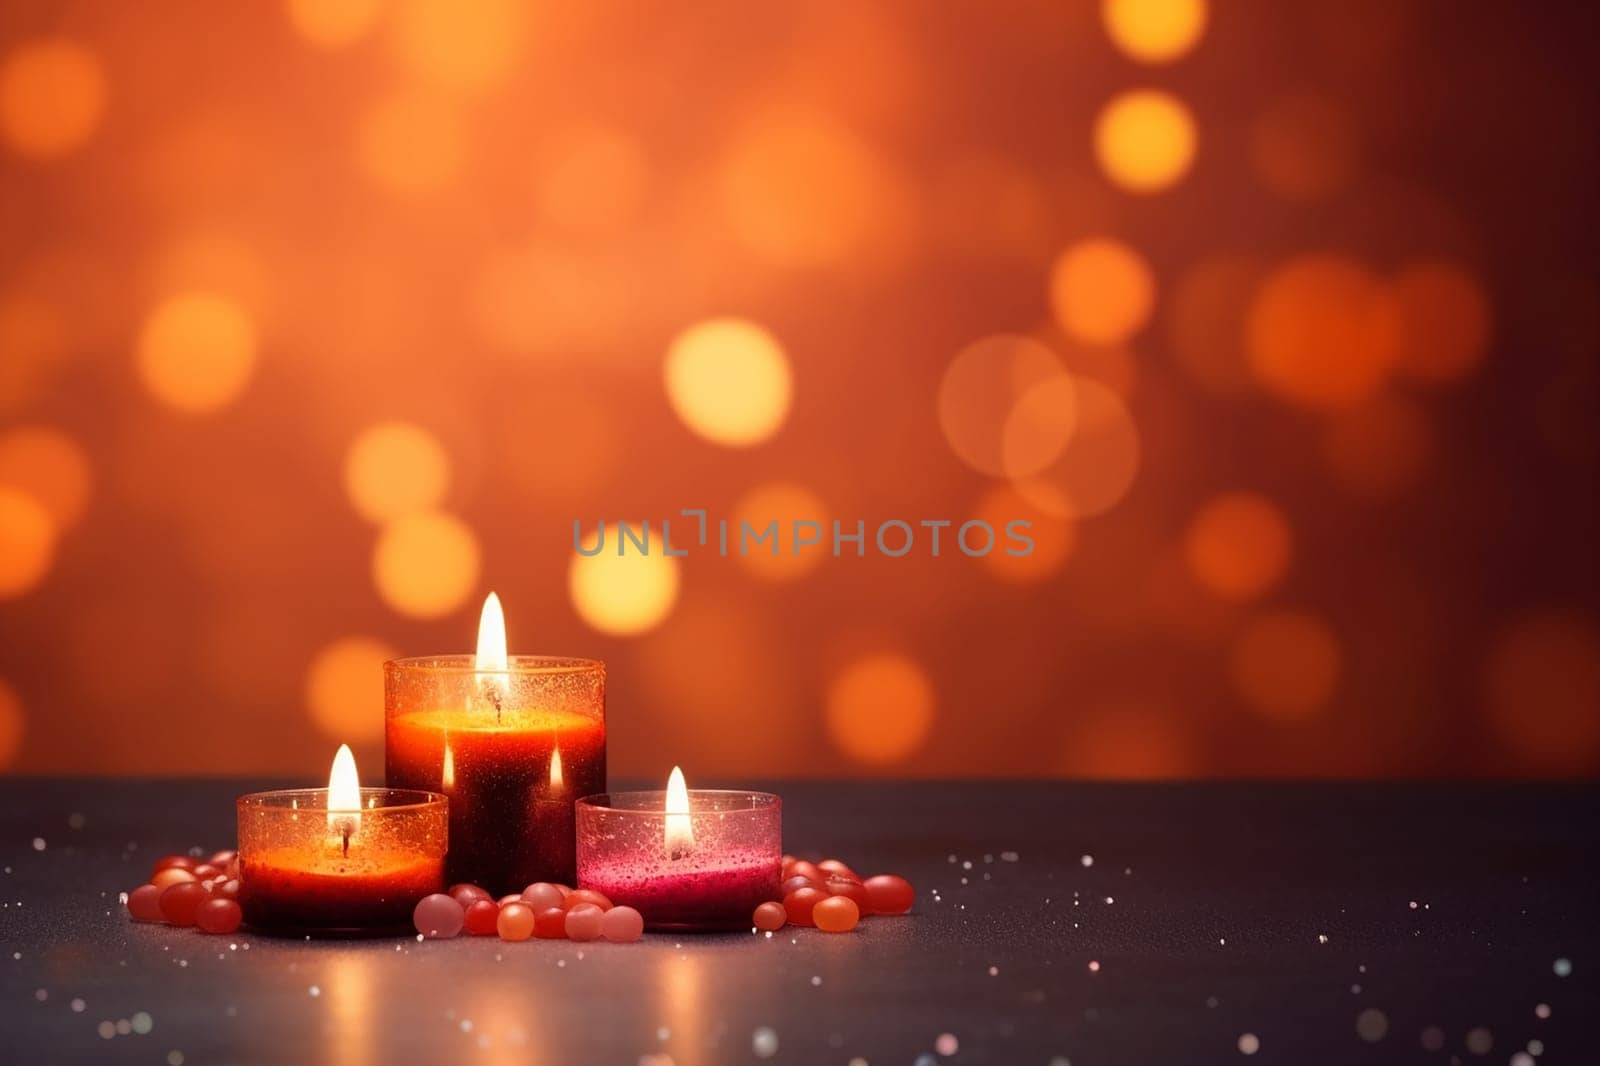 Three lit candles with a warm glow amidst bokeh lights and red beads on dark surface. by Hype2art